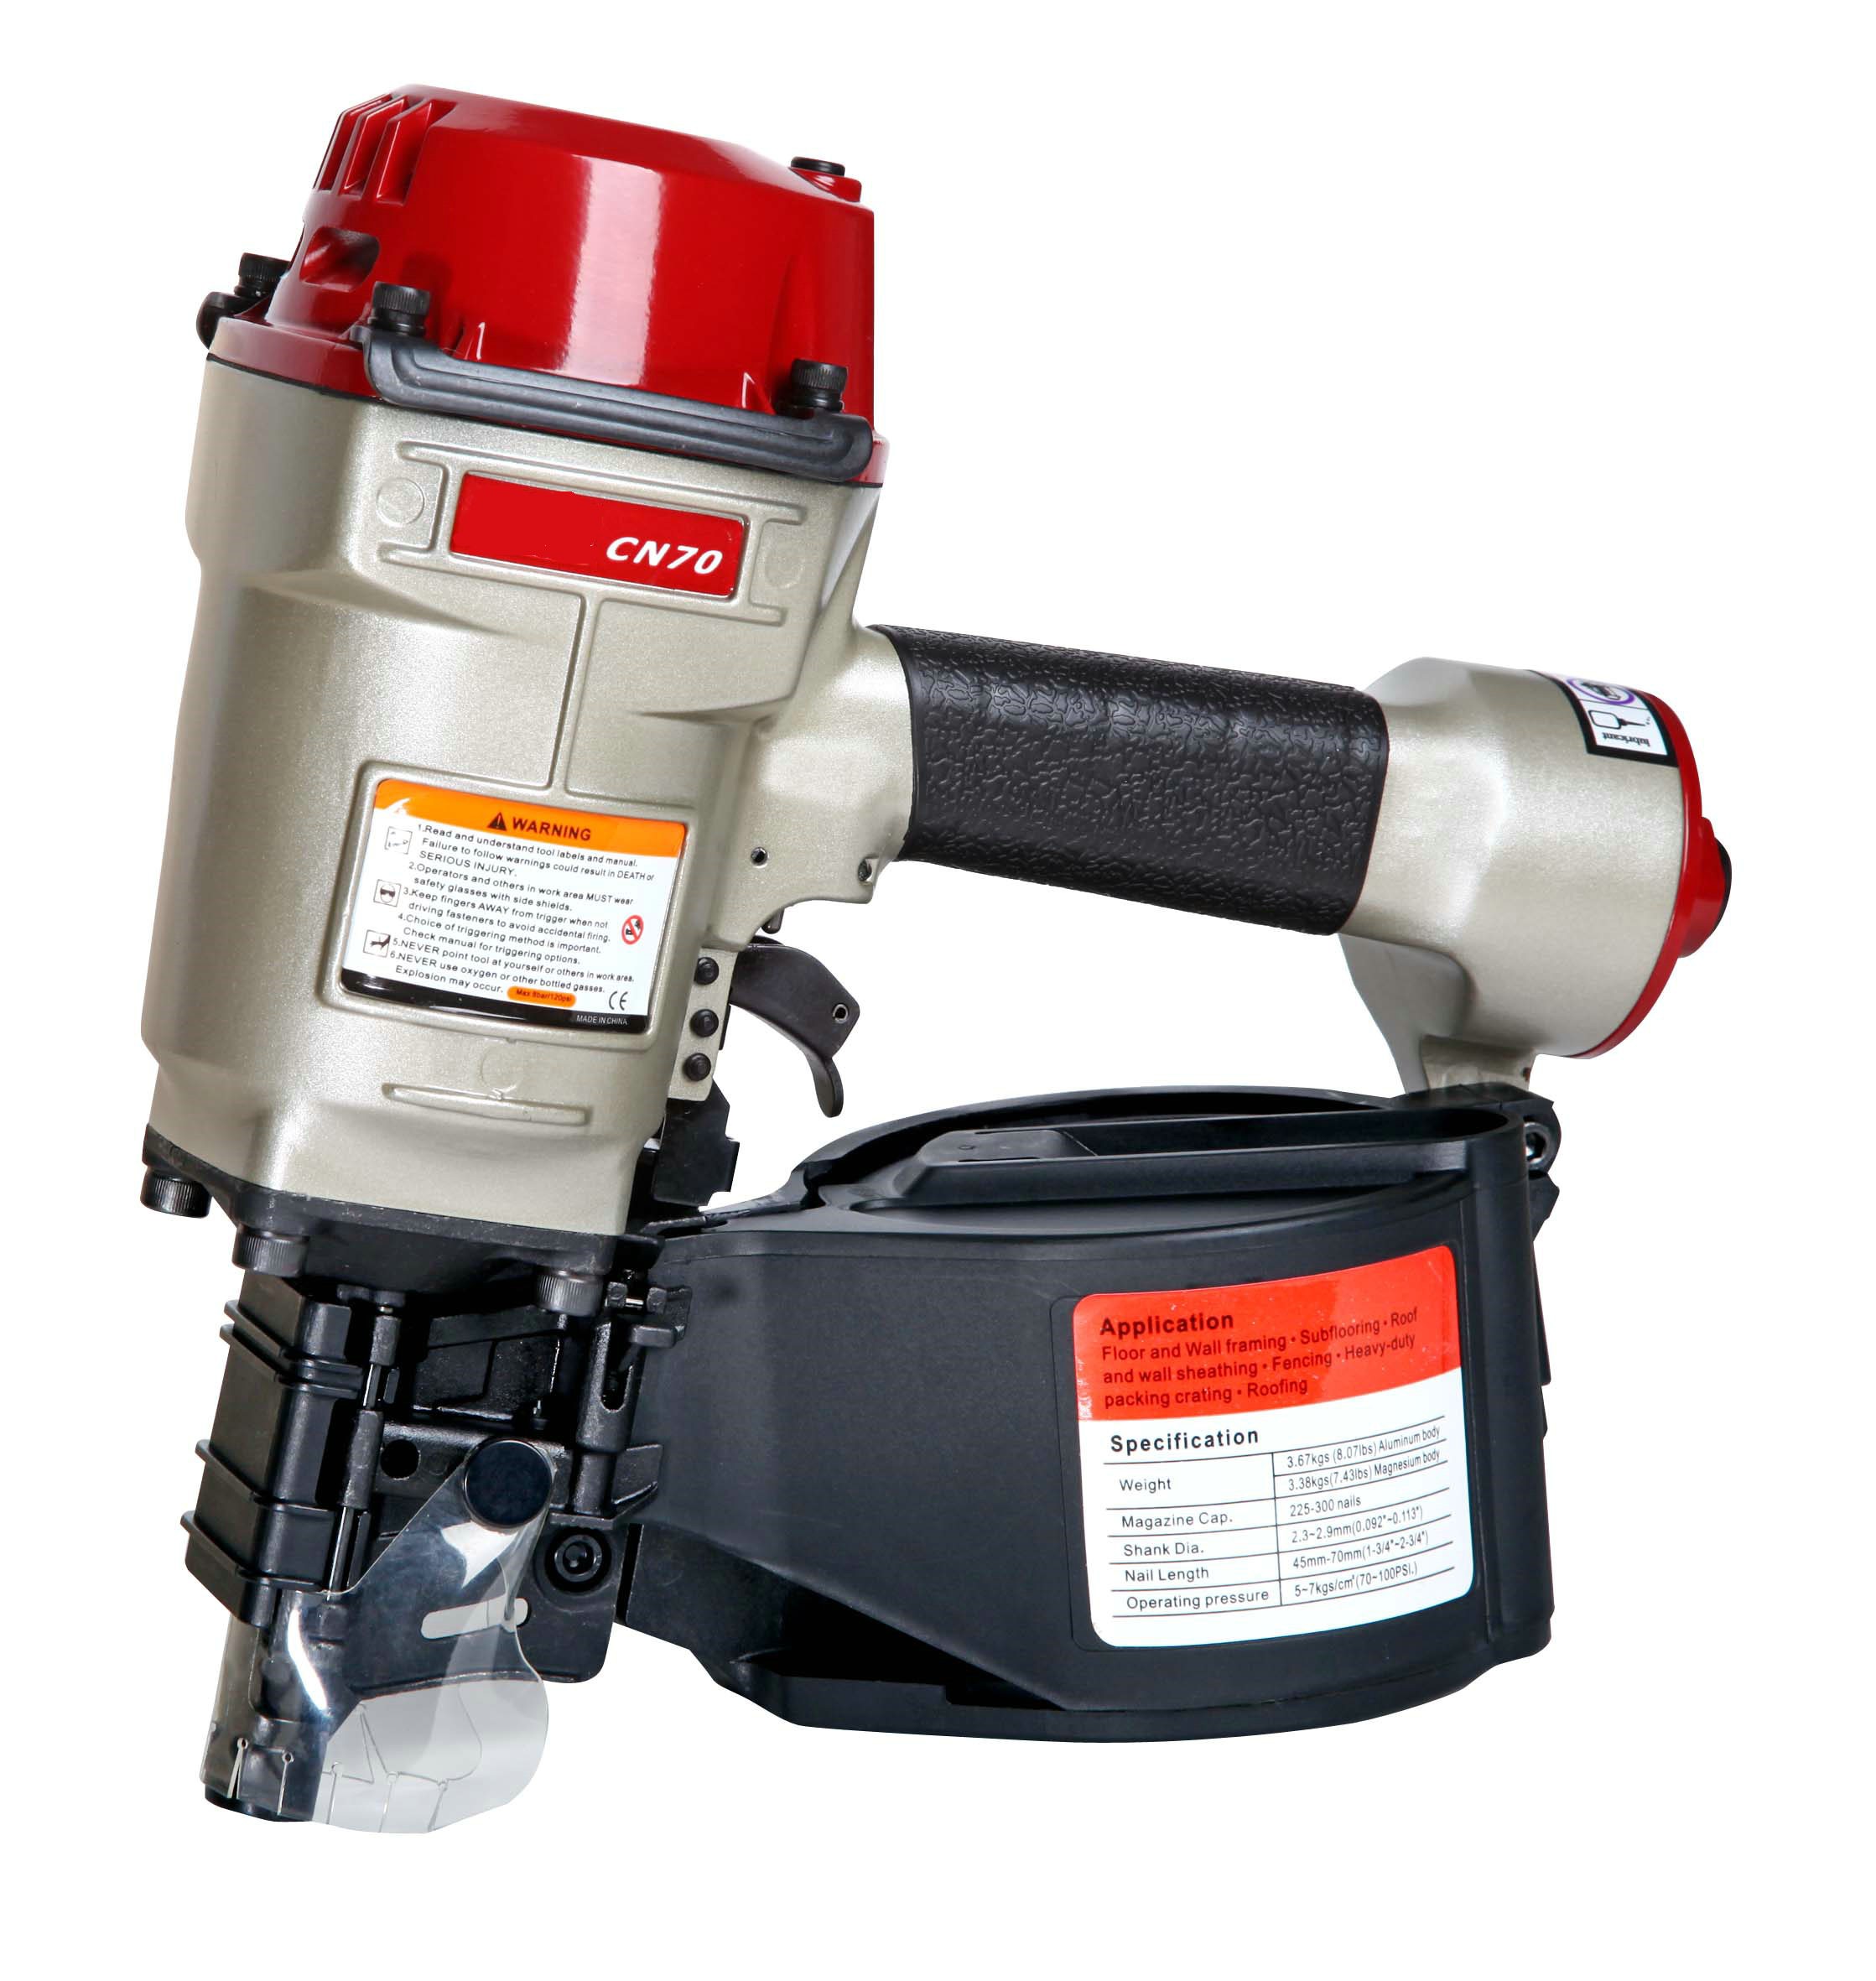 CN70 Pneumatic Coil Nailer for wooded pallets and crates